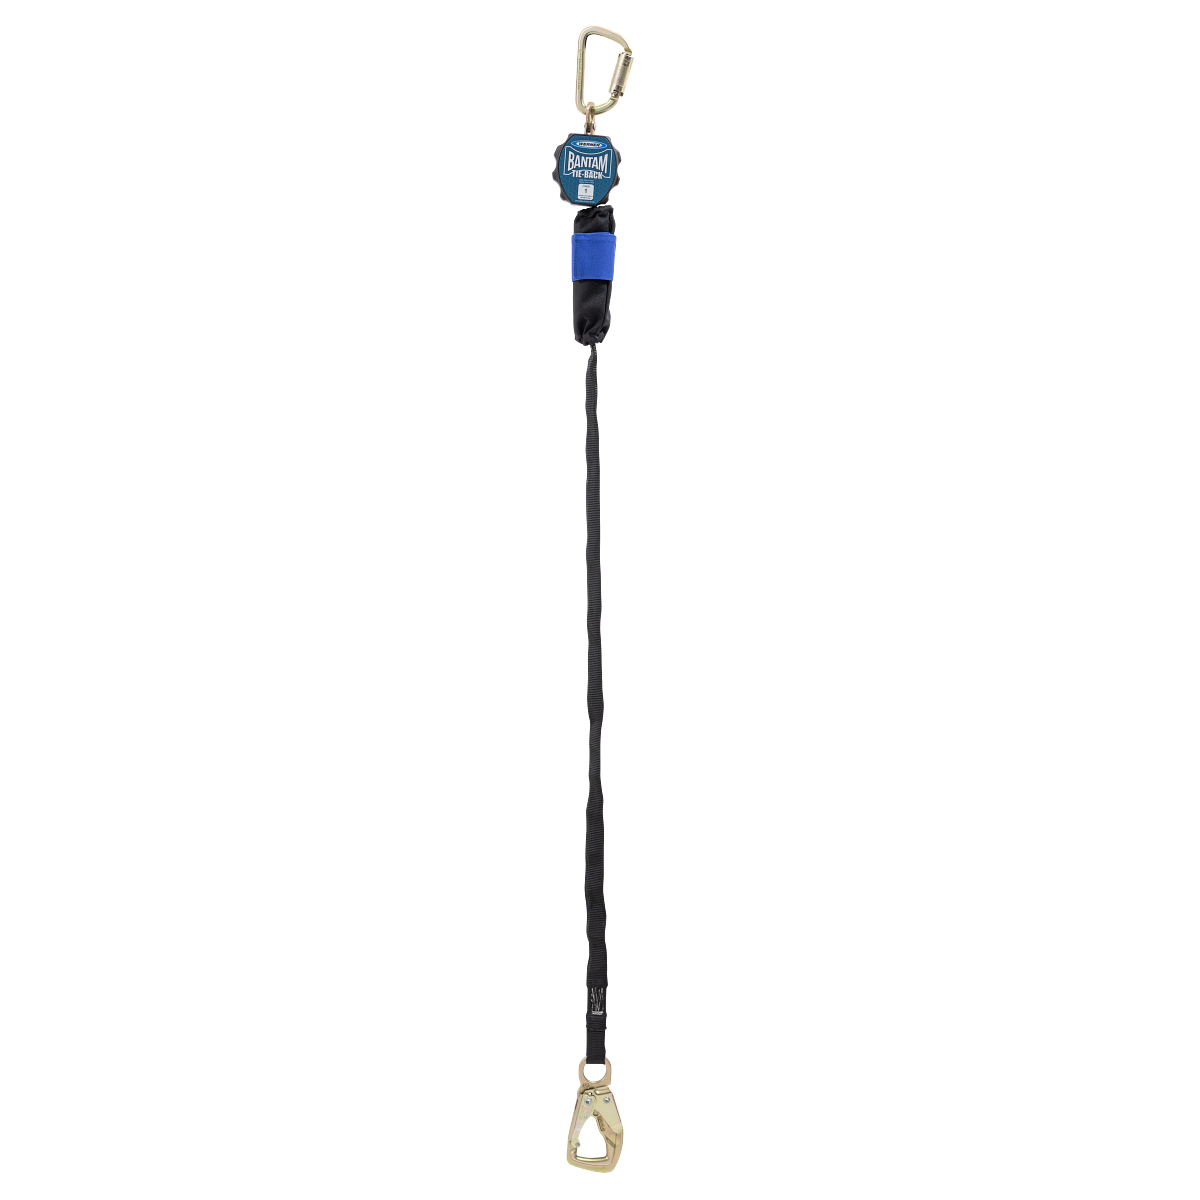 CONNEXION VARIO 200 to 400 cm - Keltic Falcon Rope Access Experts